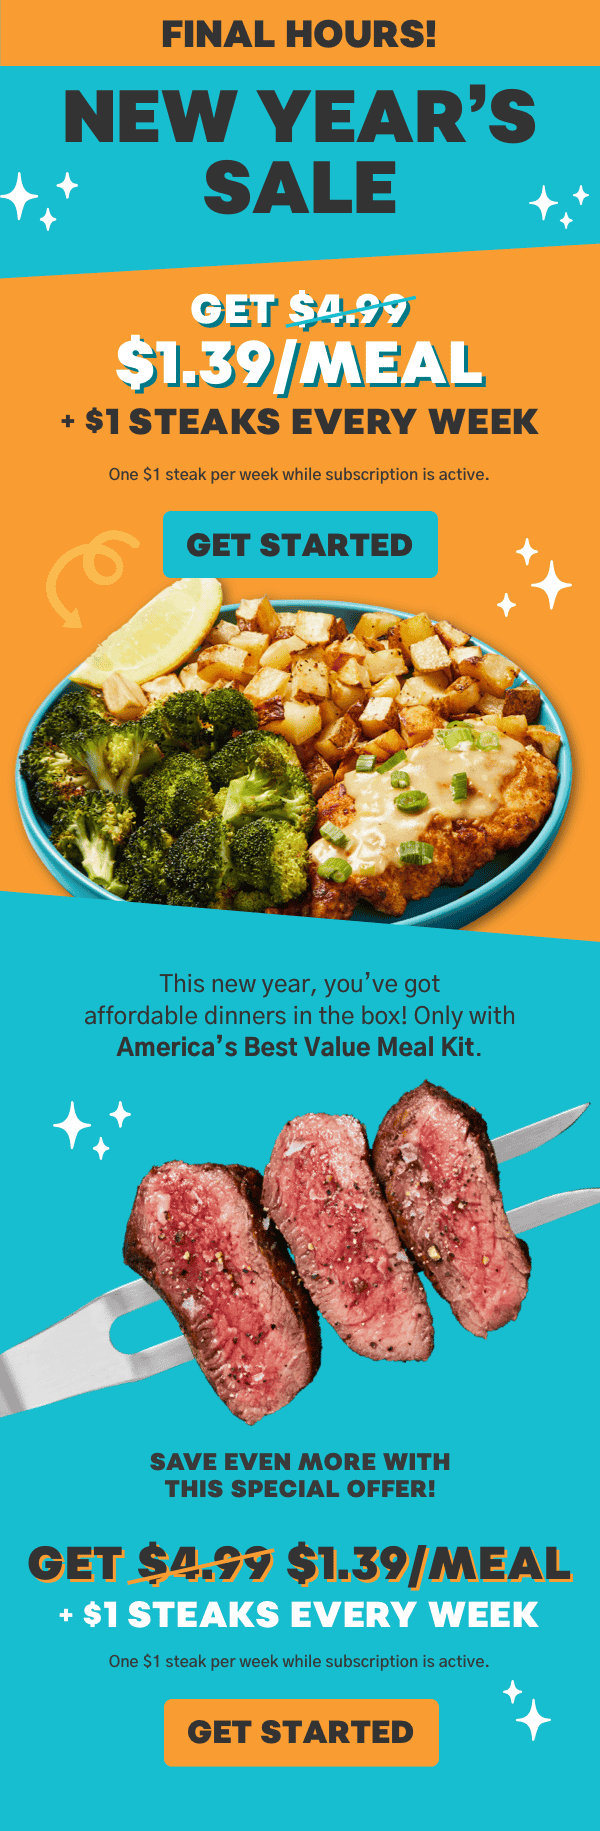 This new year, you've got affordable dinners in the box! Get \\$1.39/meal + \\$1 steaks every week.